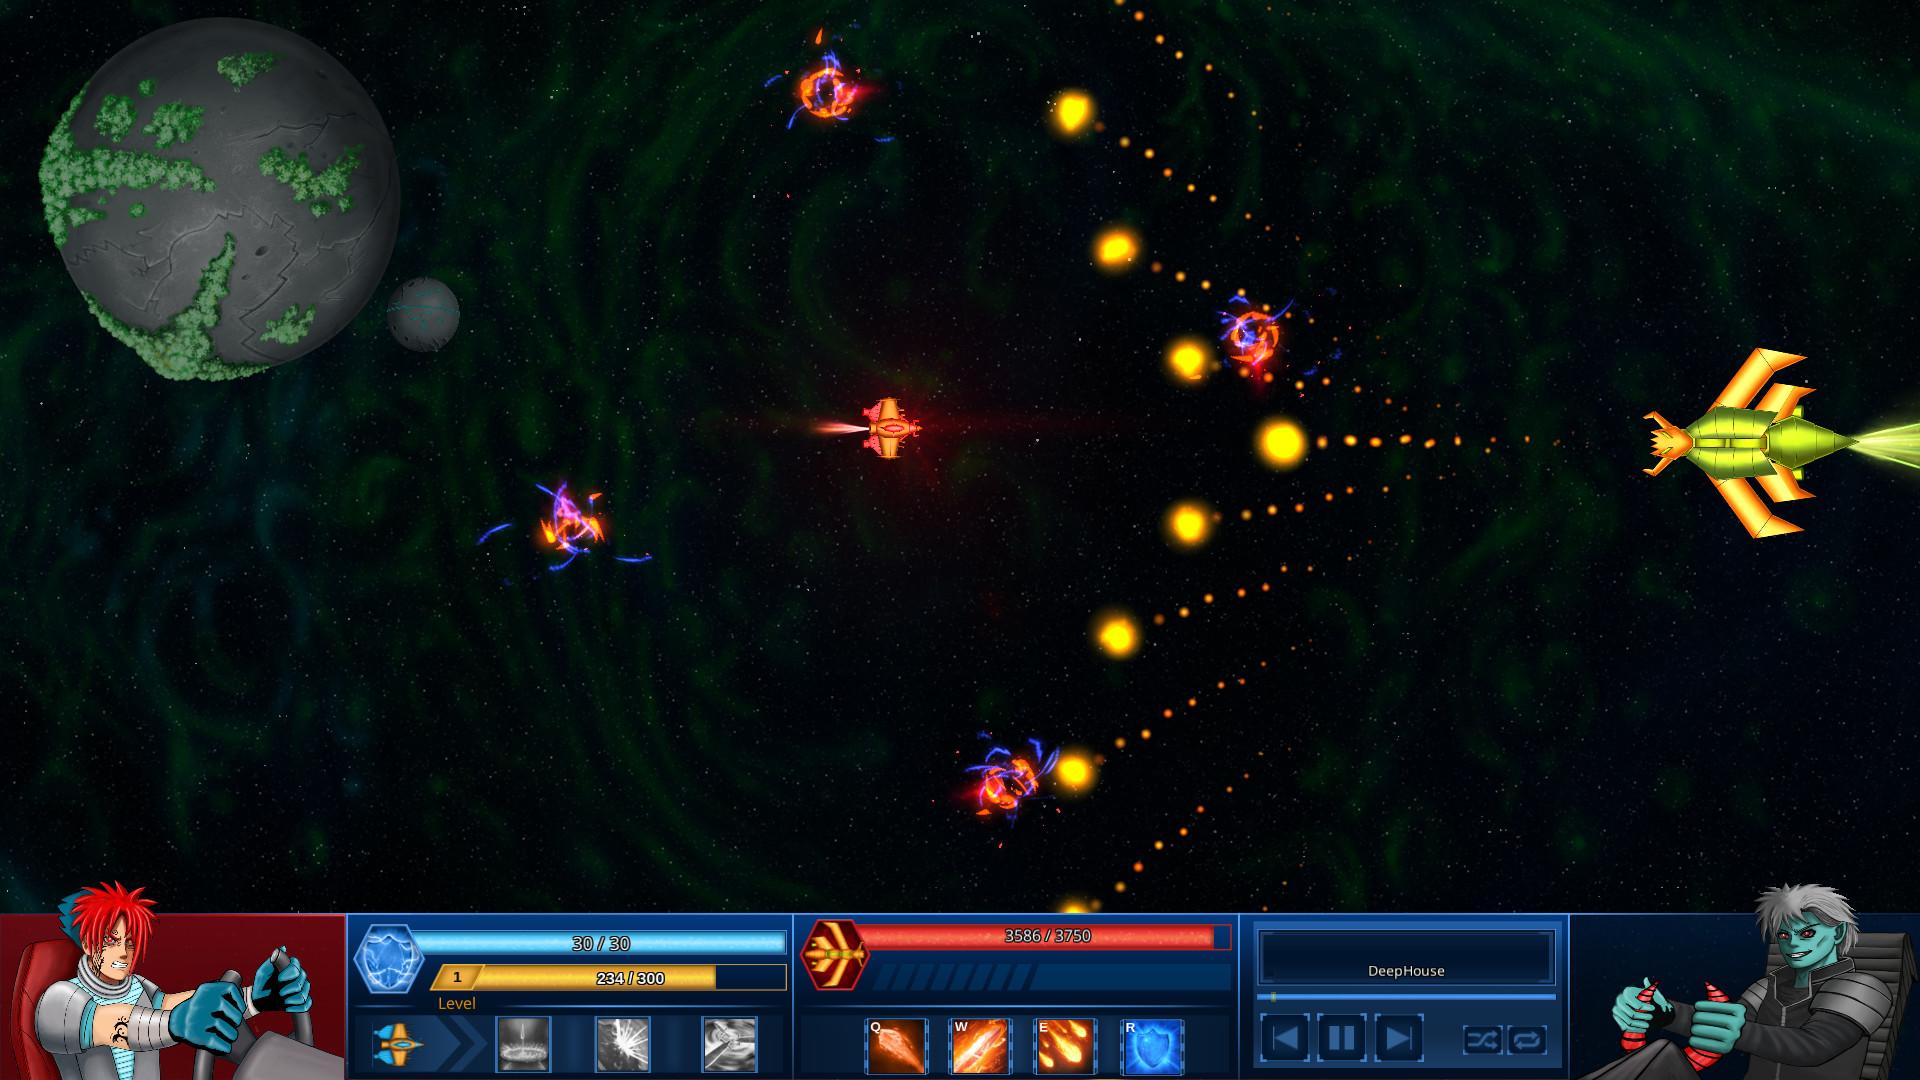 Screenshot №9 from game Survive in Space